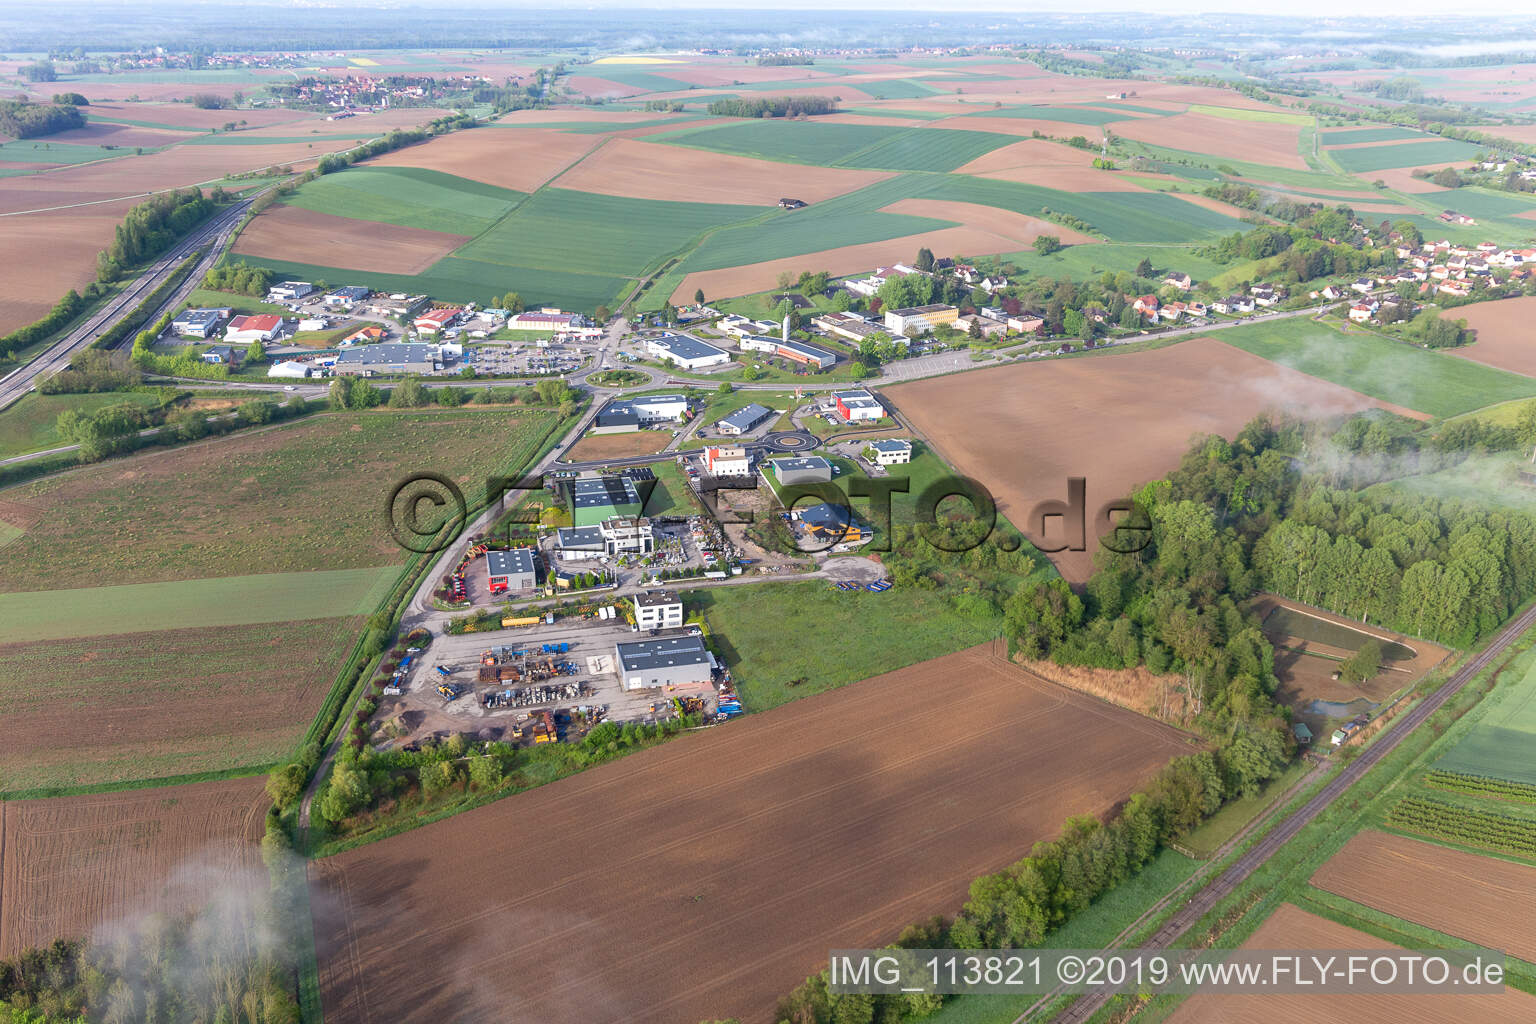 Soultz-sous-Forêts in the state Bas-Rhin, France from the drone perspective